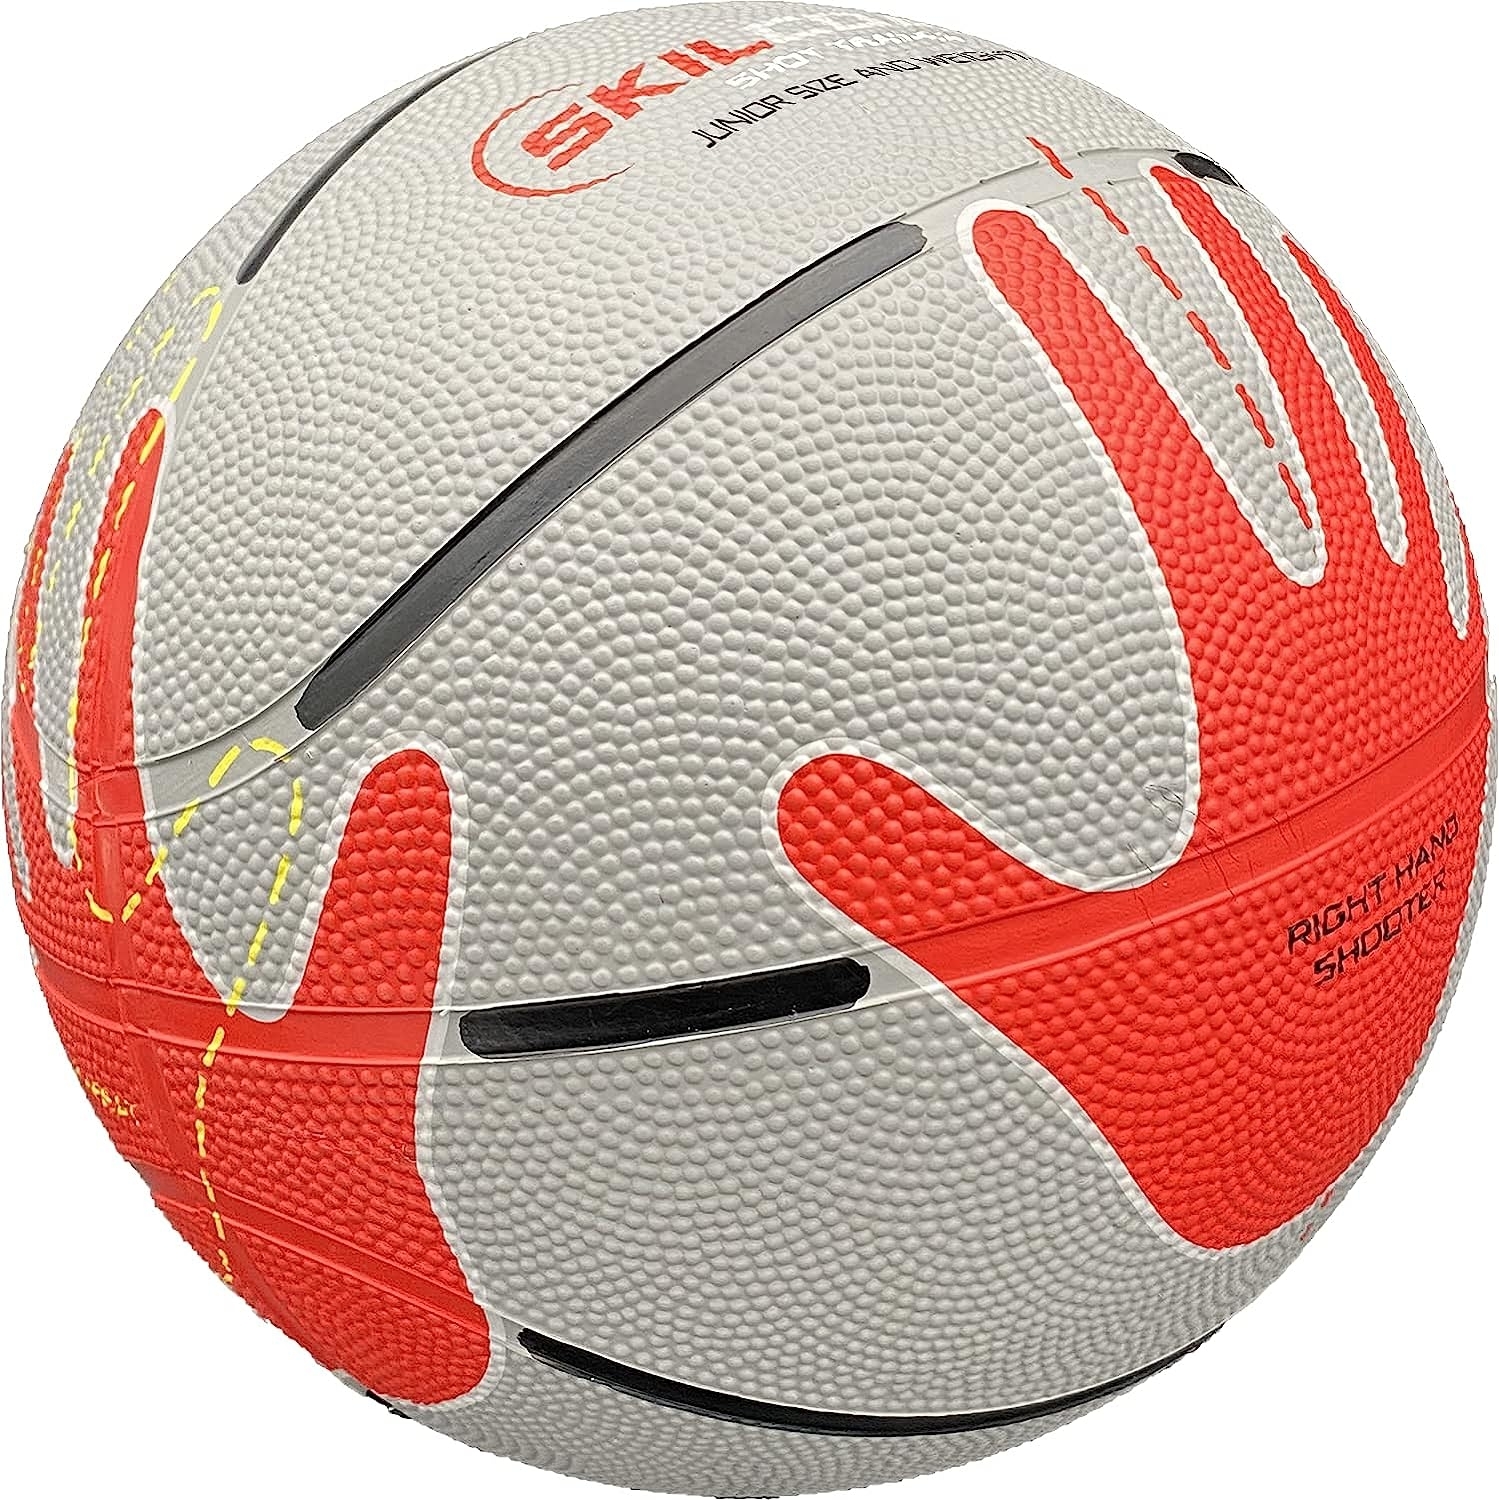 Light gray basketball with red hand print and dashed yellow hand prints